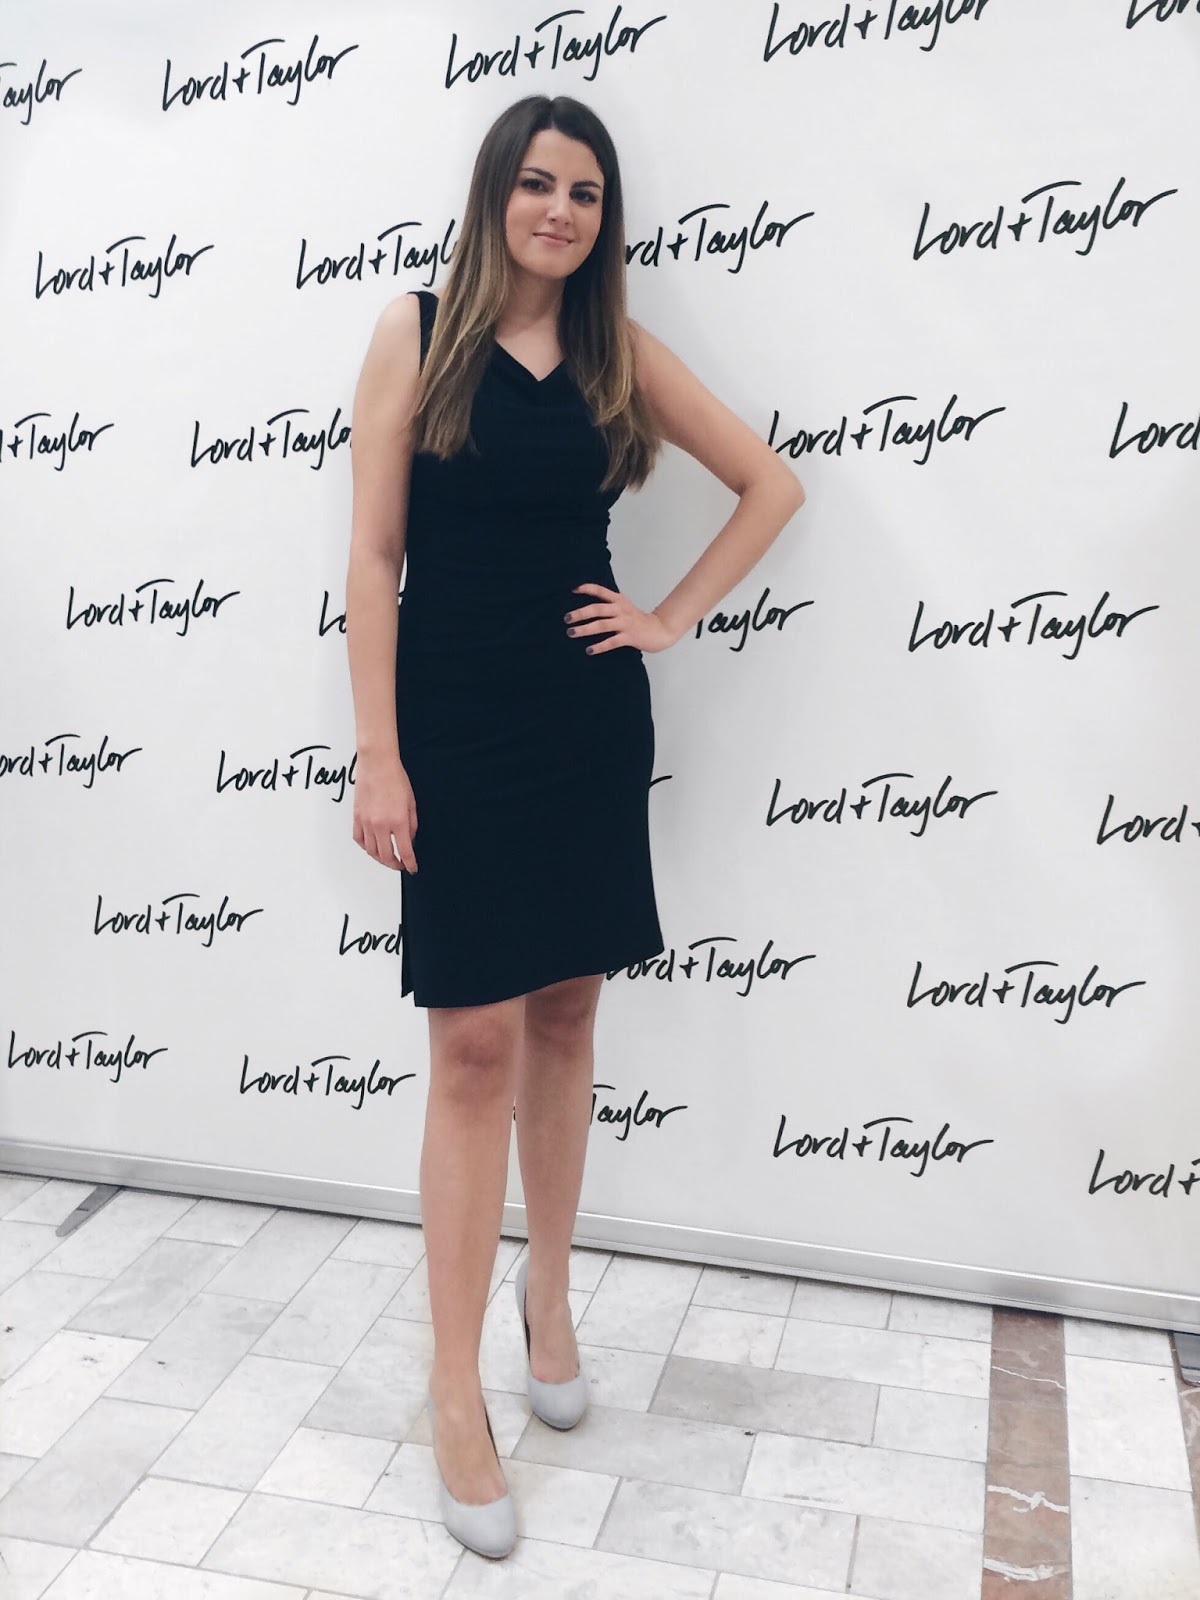 lord and taylor formal wear